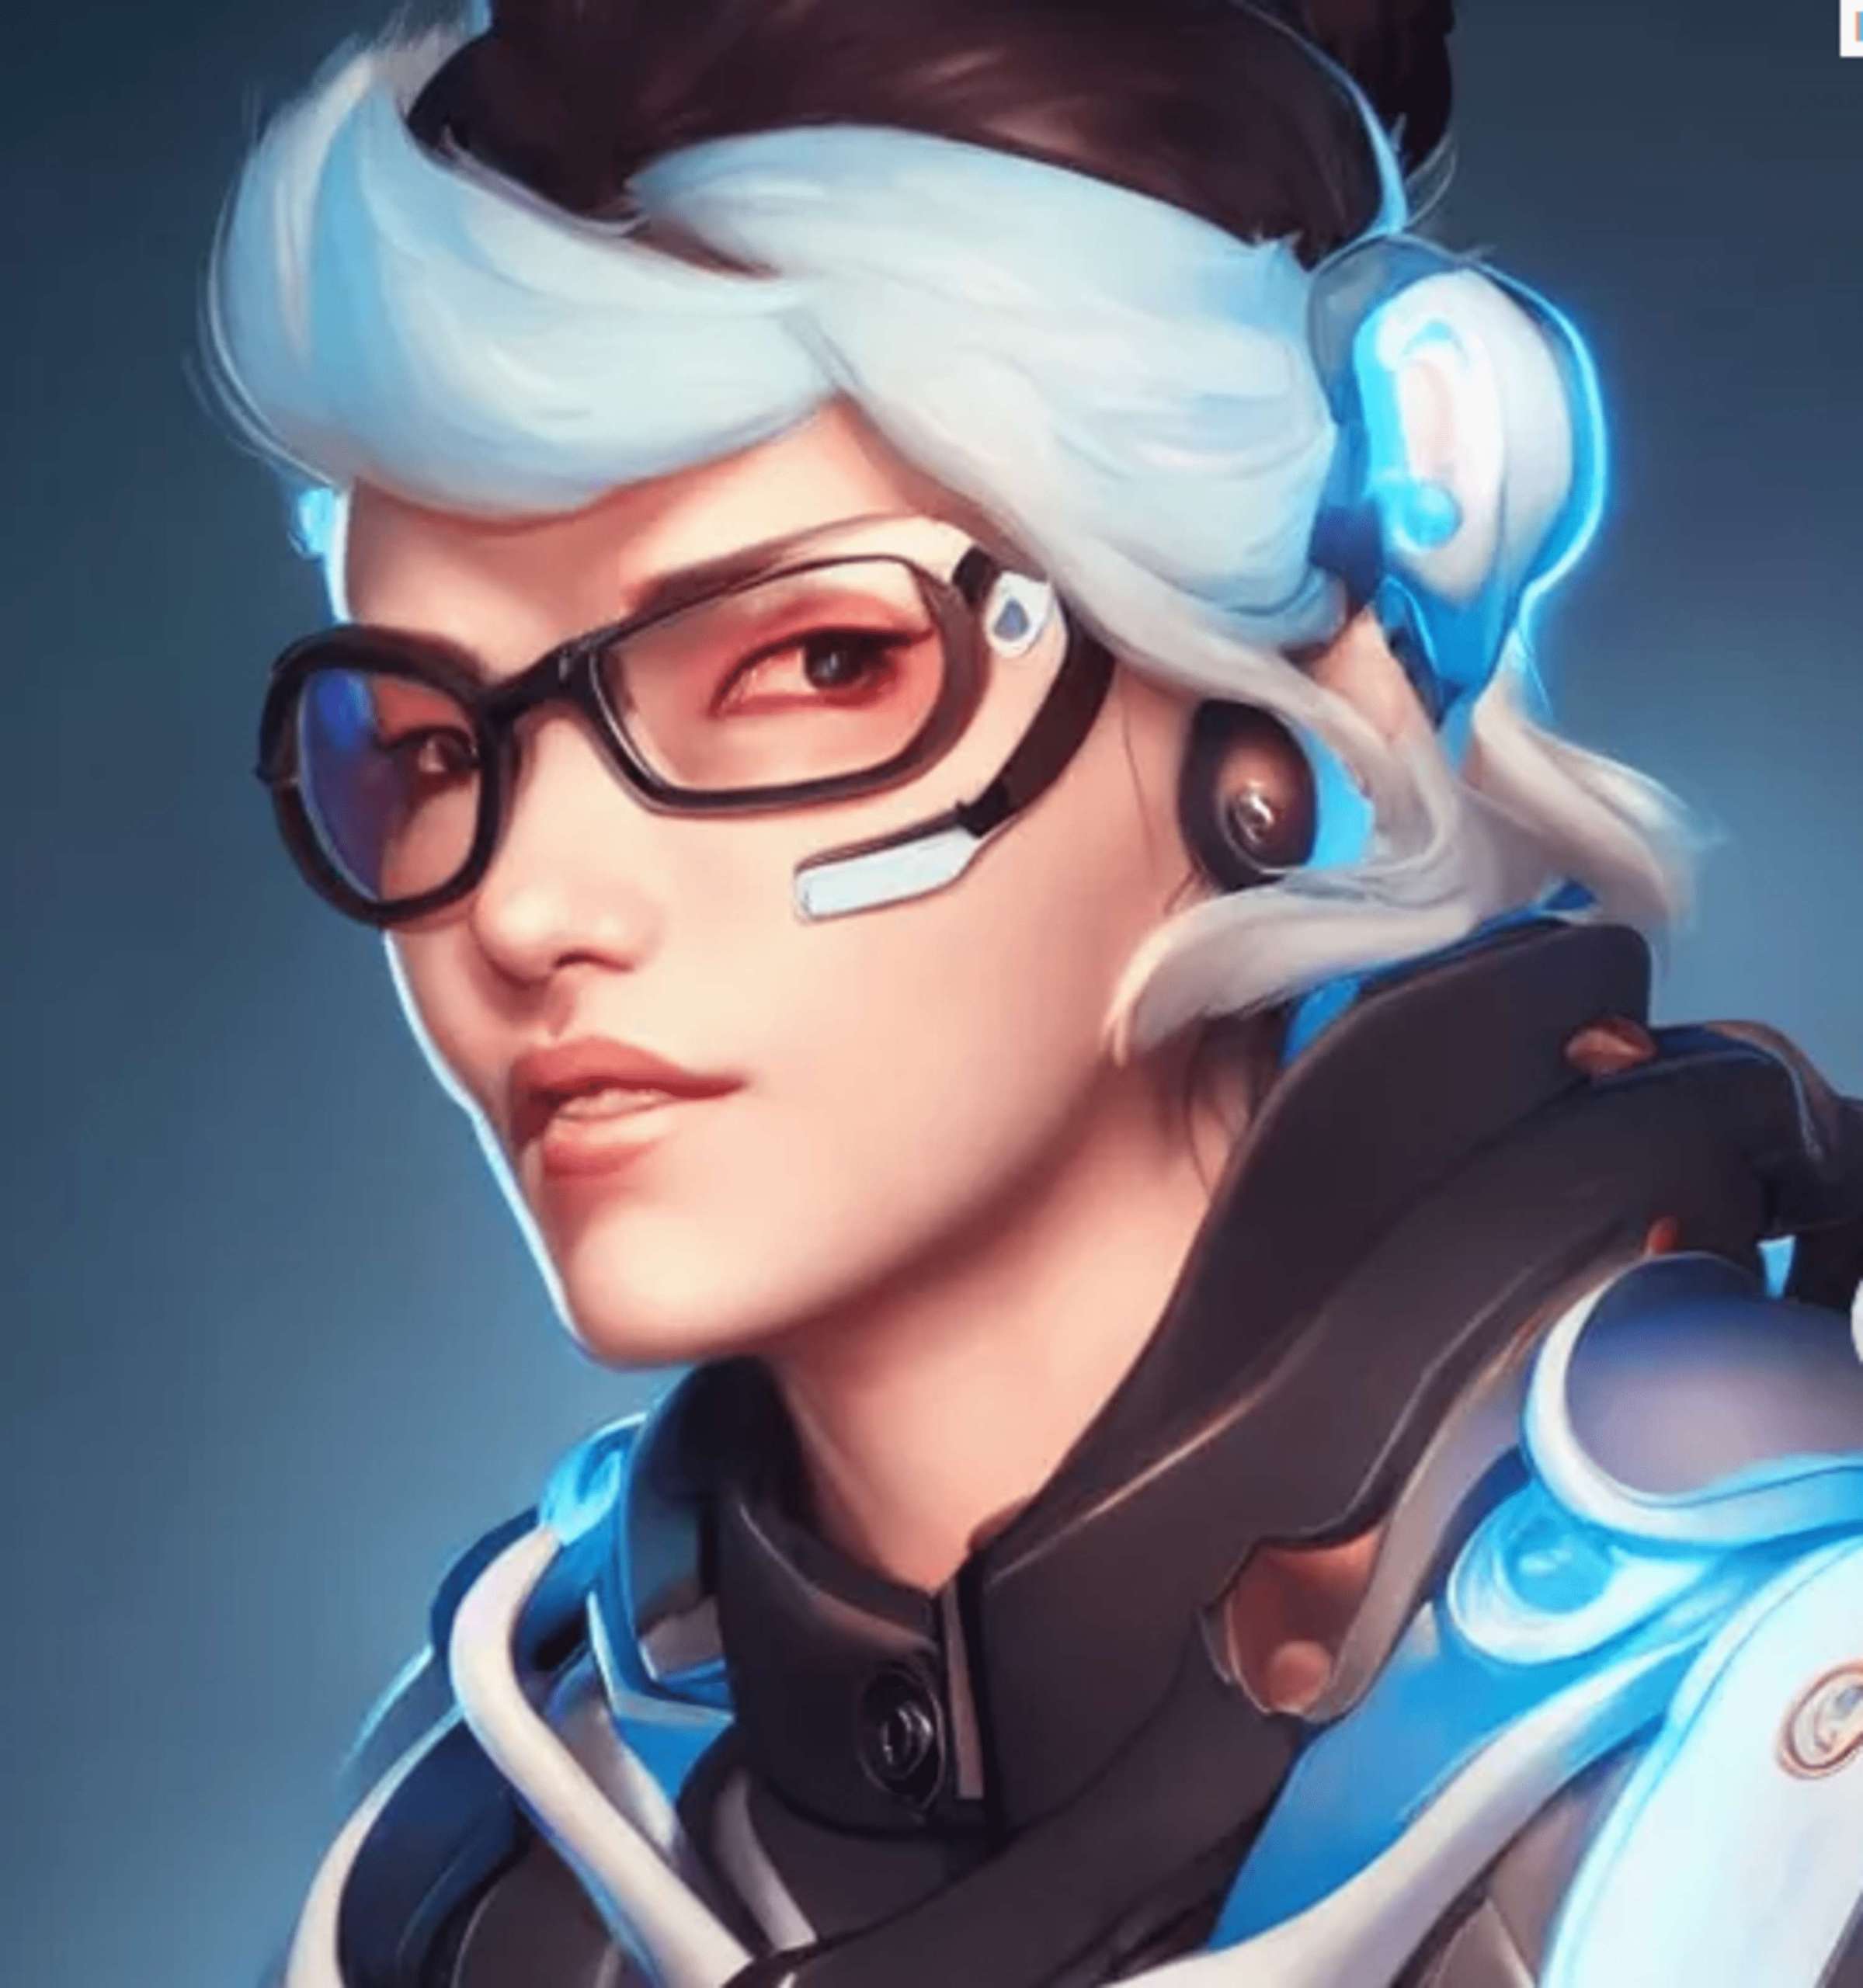 These Overwatch Hybrids Created By AI Are Both Stunning And Disturbing